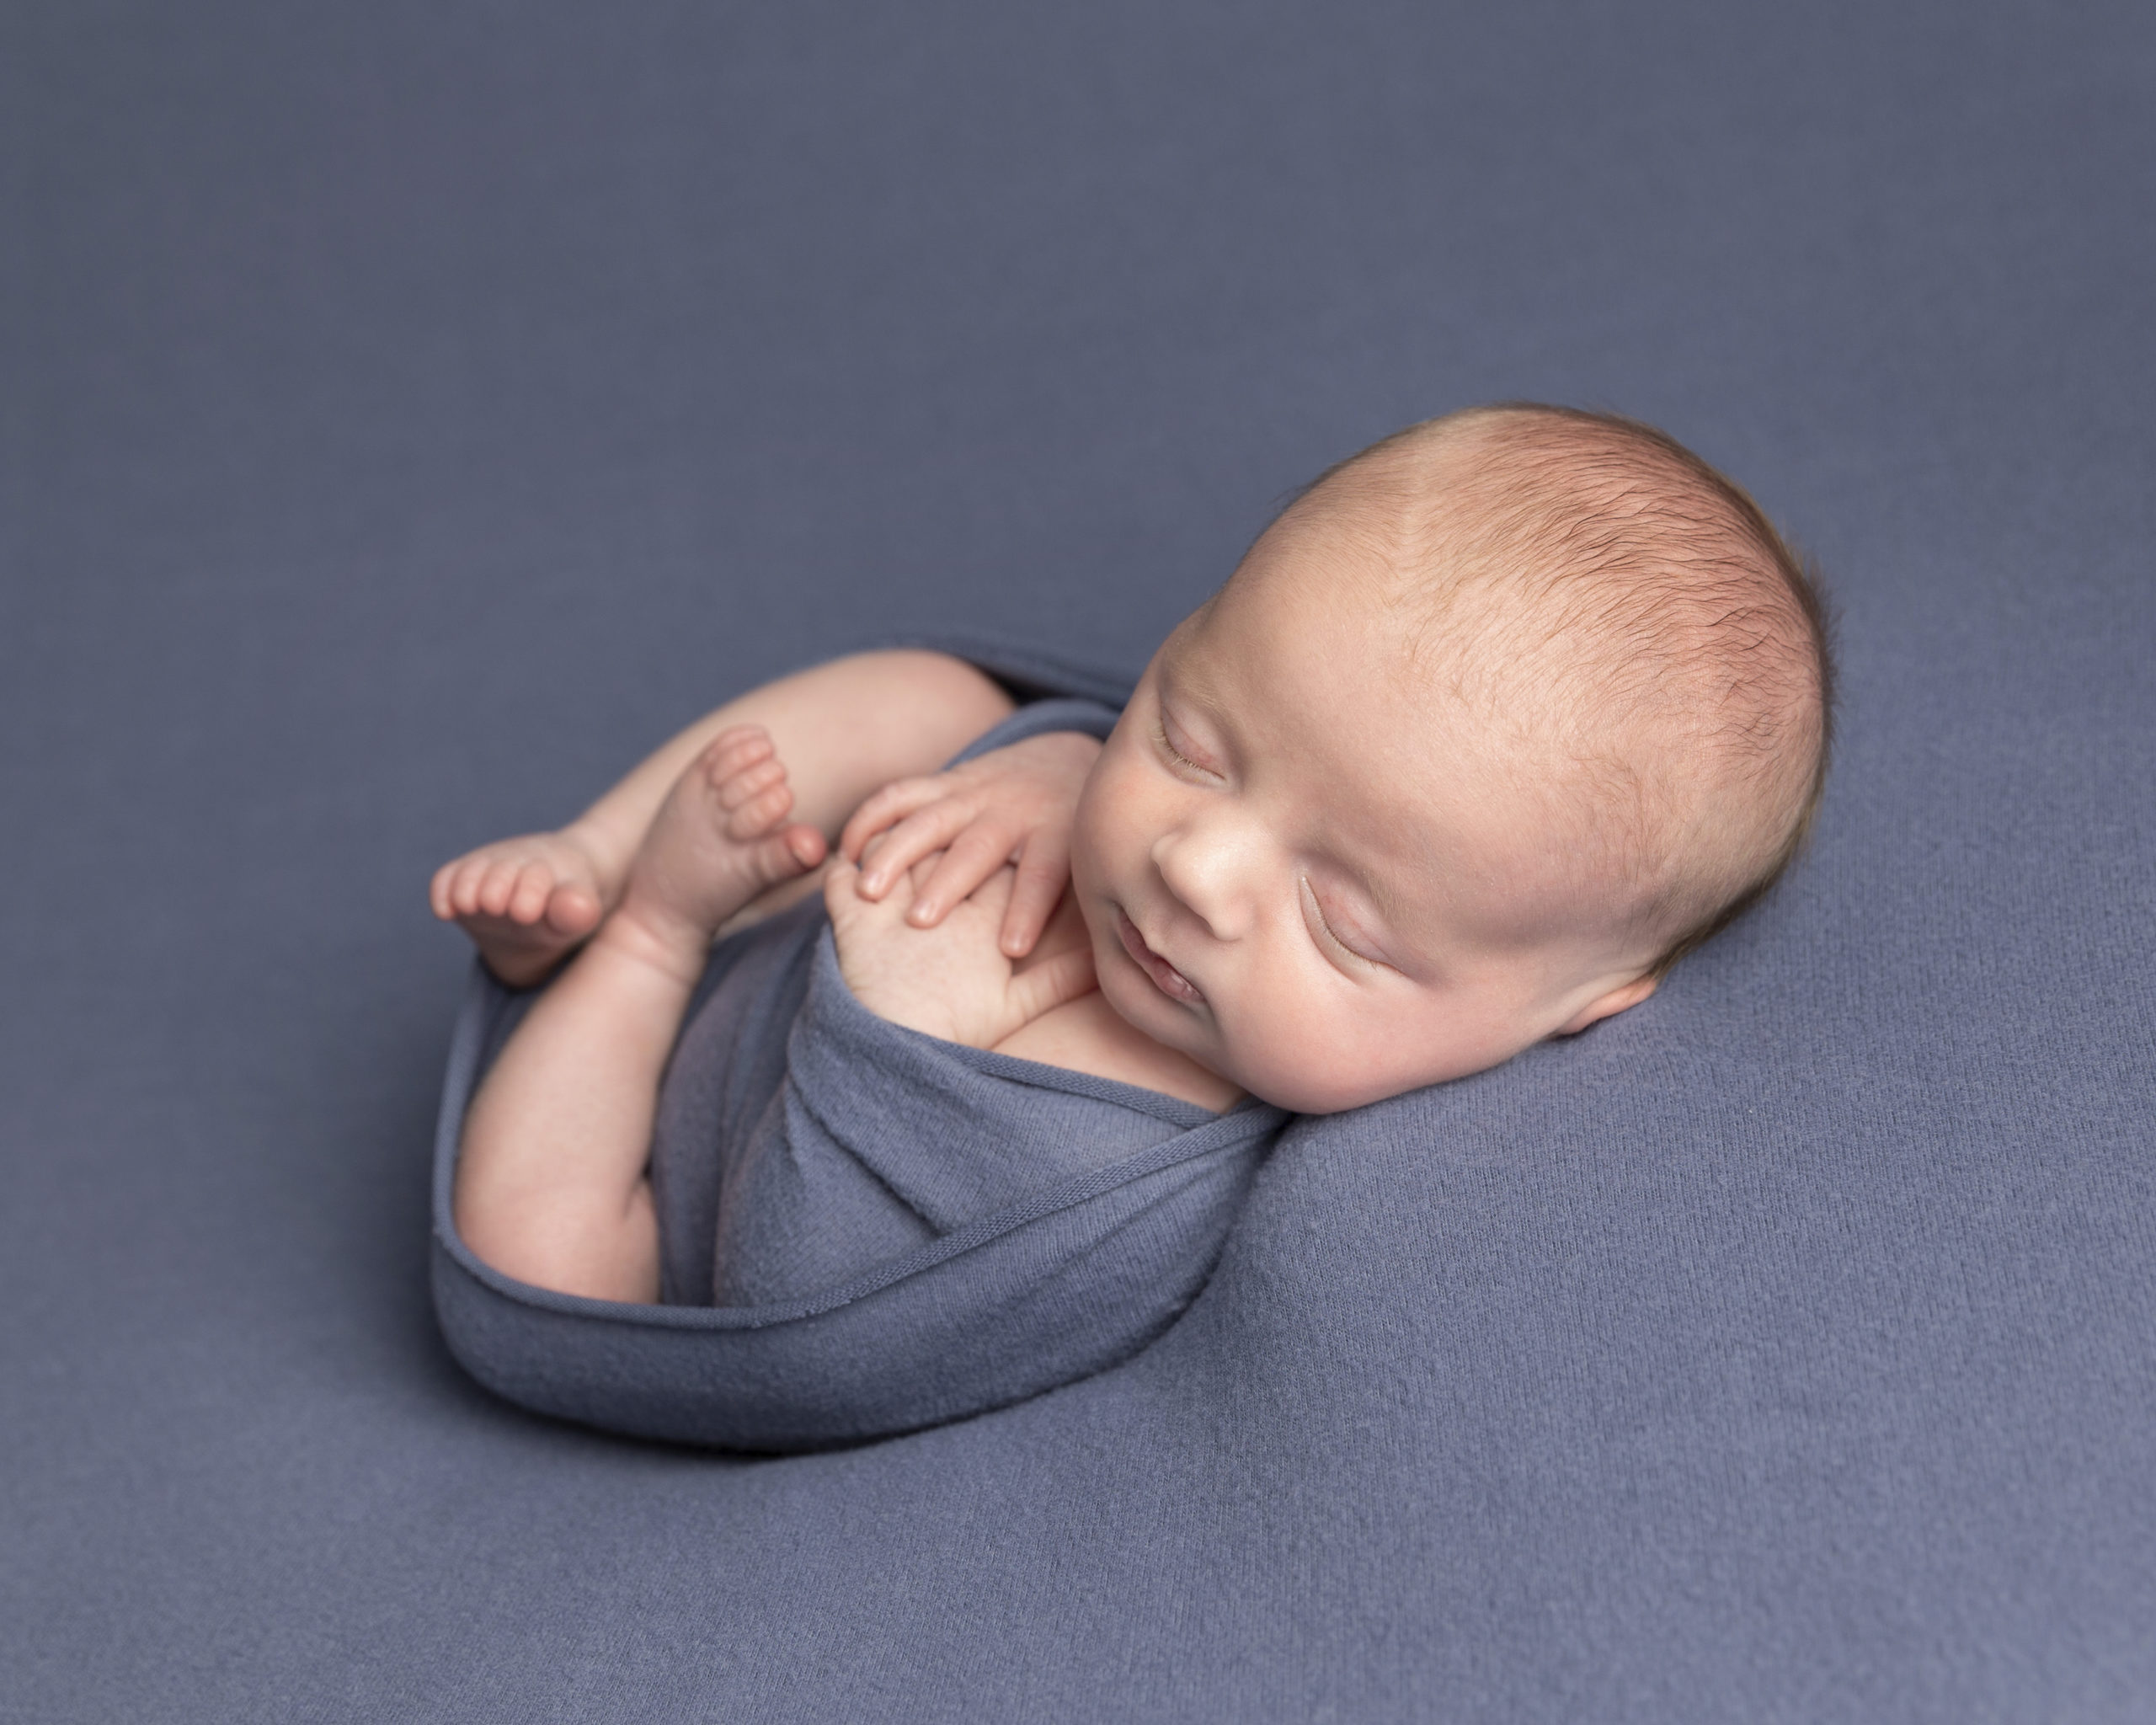 baby boy wrapped in a blue blanket during a photography session